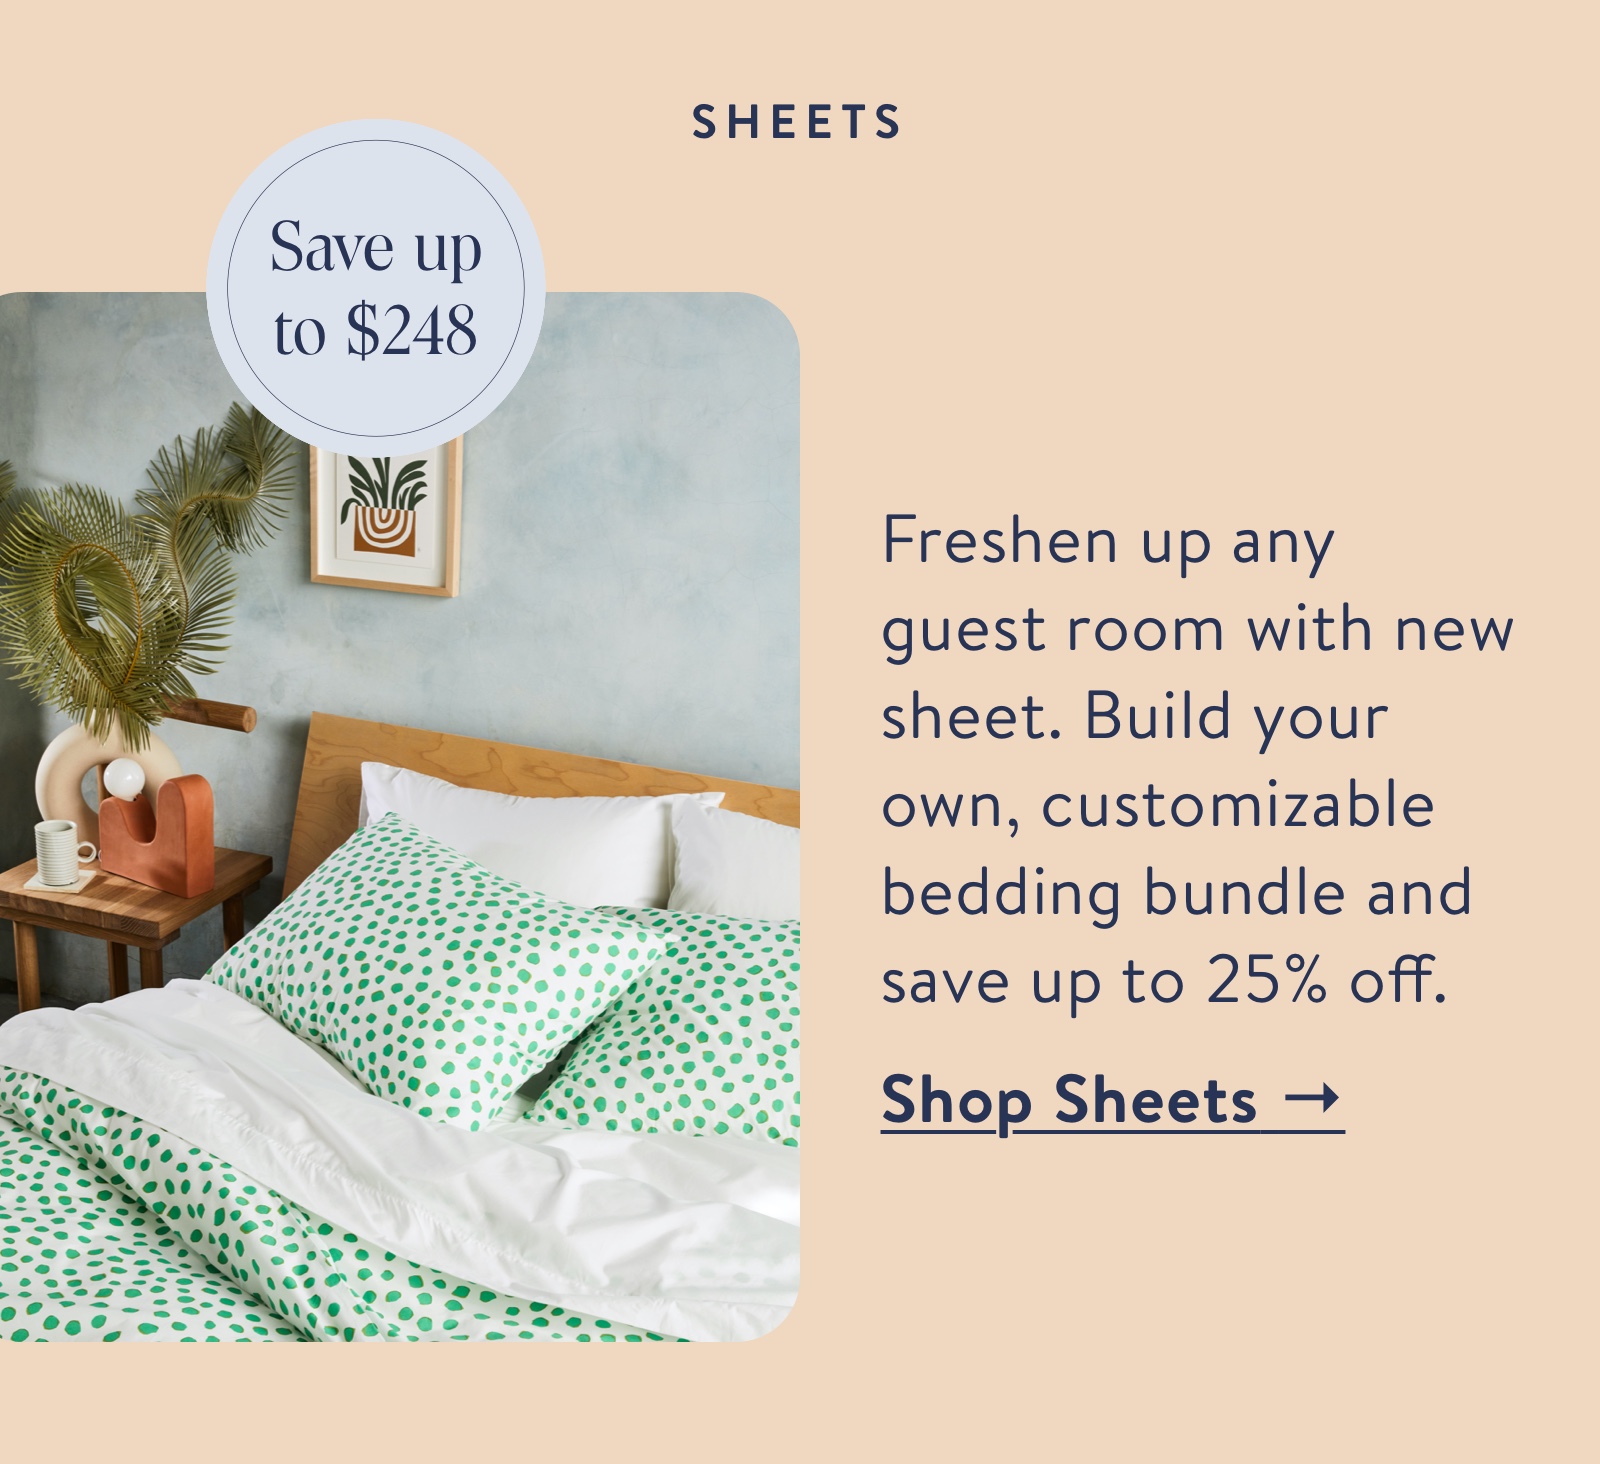 Build your own, customizable bedding bundle and save up to 25% off.